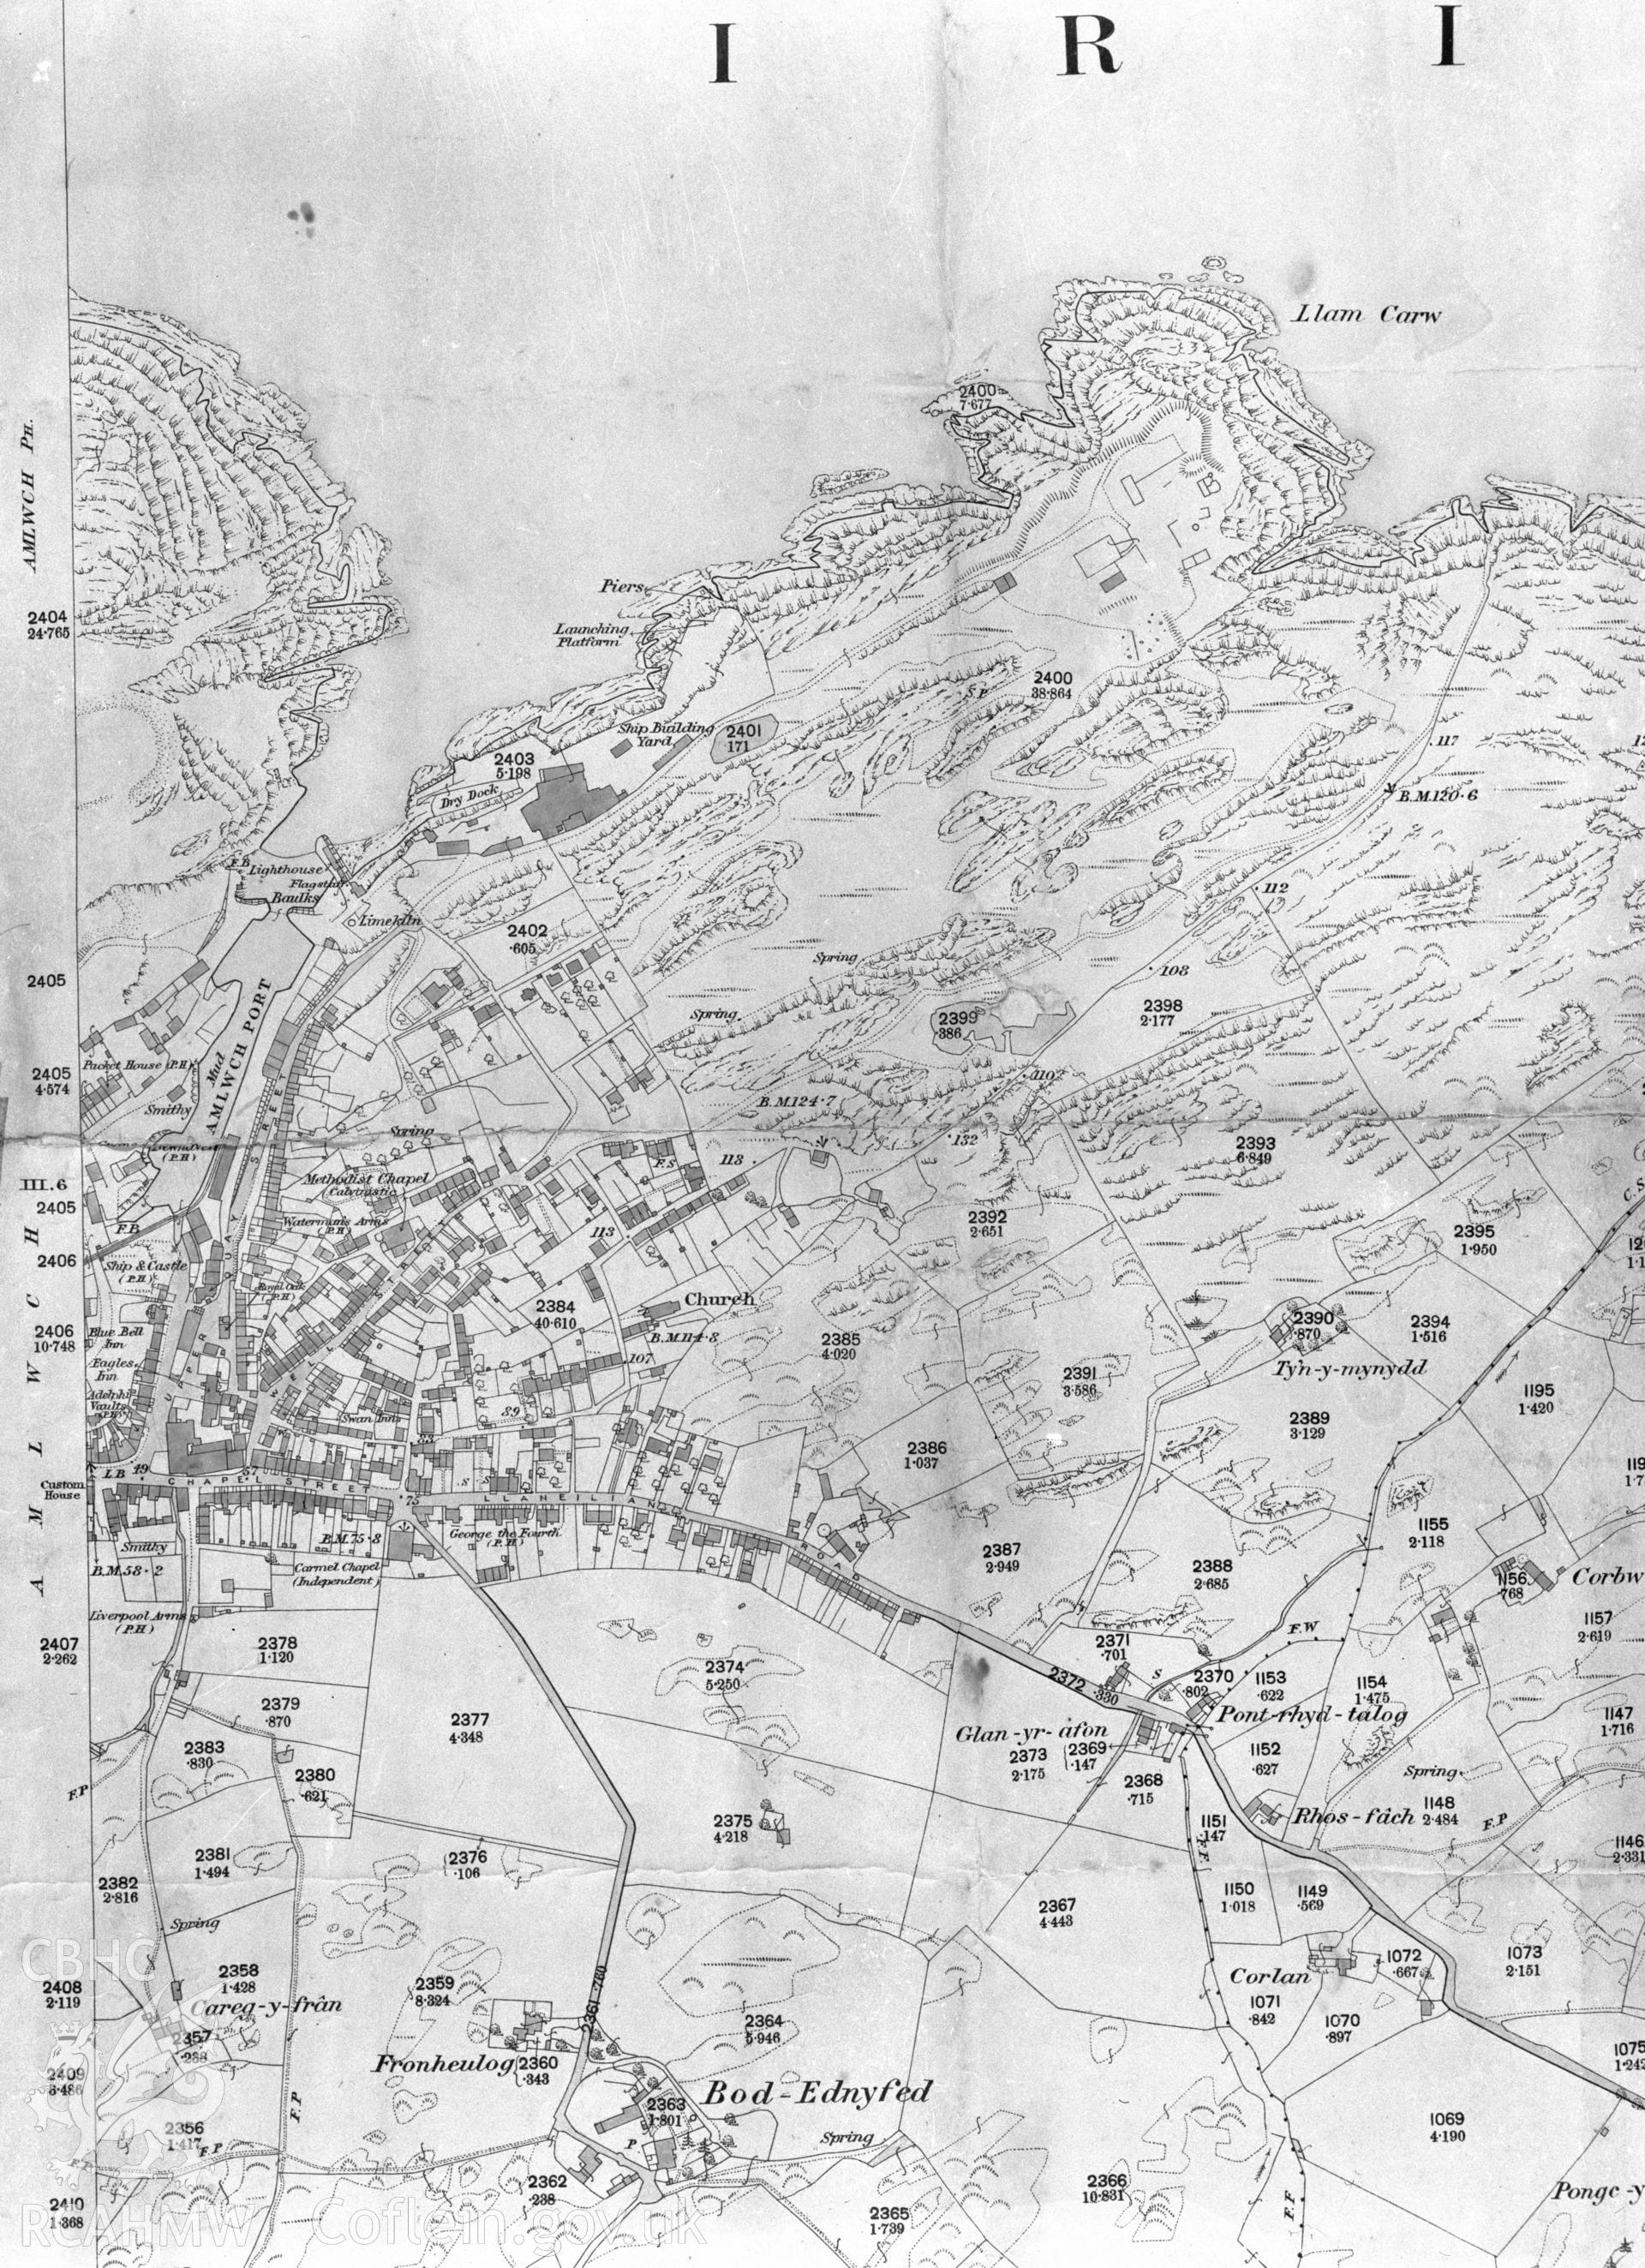 Black and white acetate negative showing early maps of the area around Amlwch.